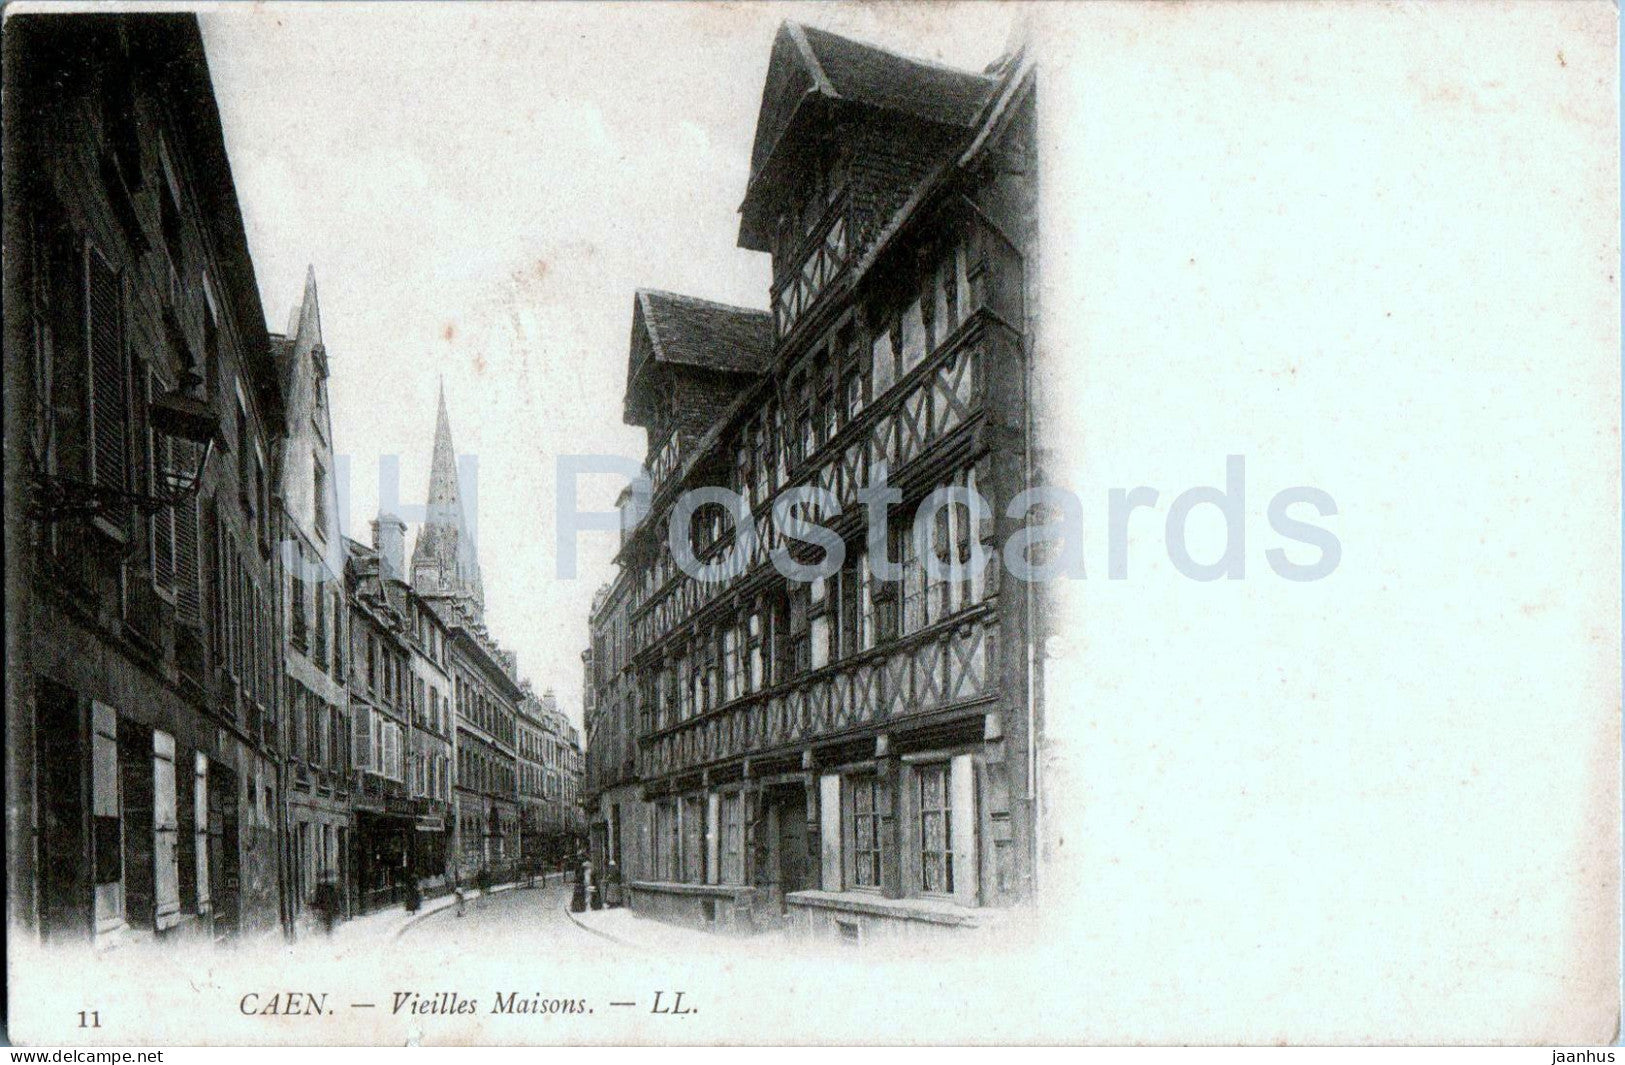 Caen - Vieilles Maisons - old houses - 11 - old postcard - France - unused - JH Postcards